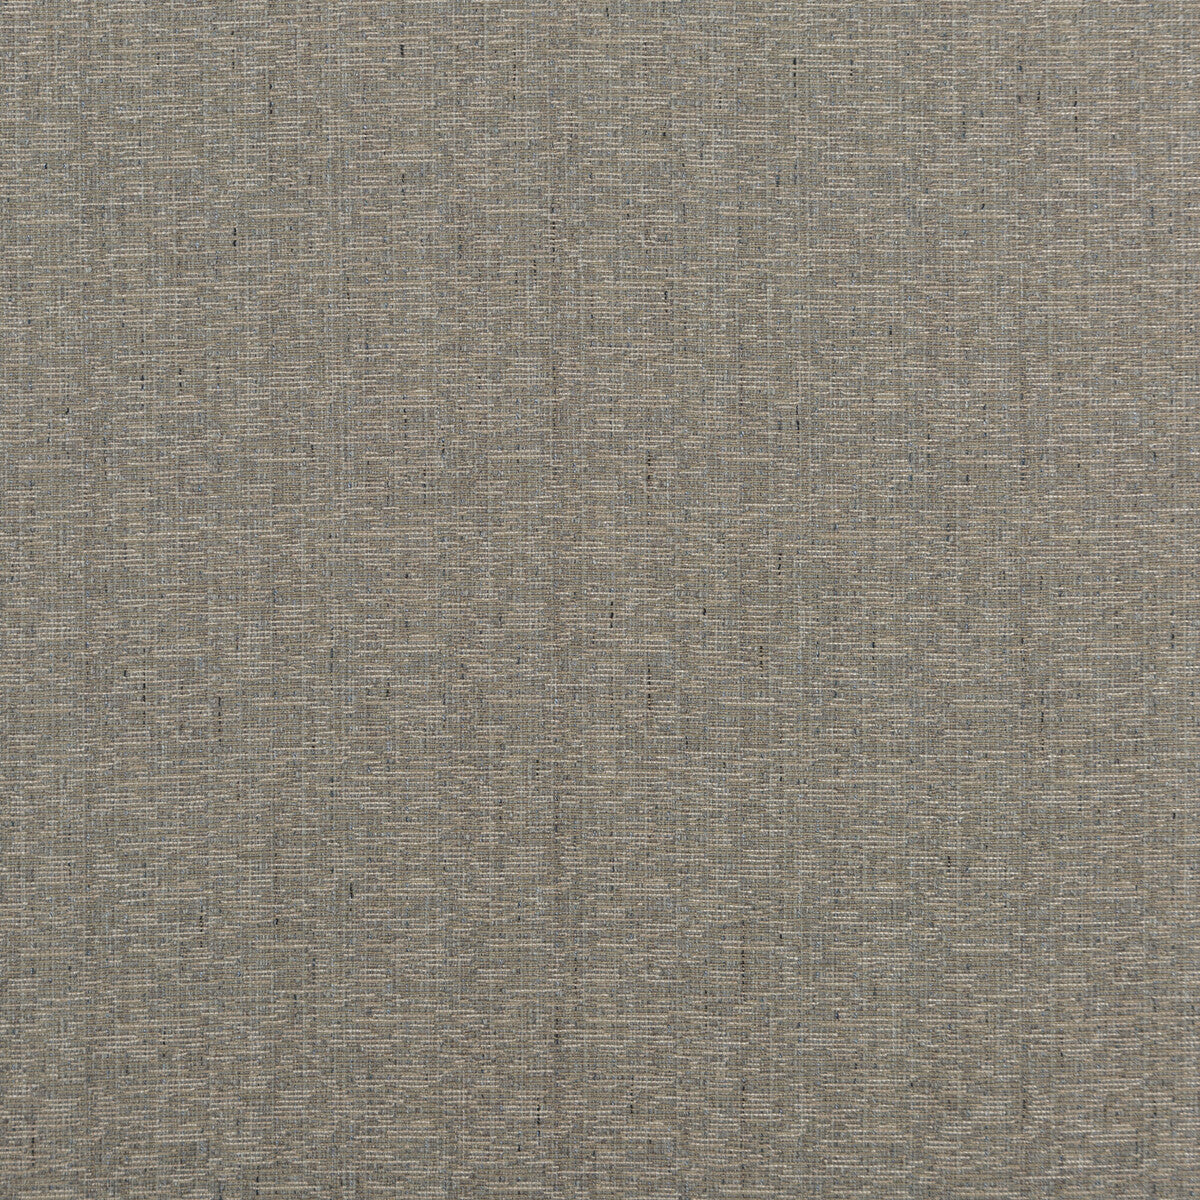 Camina fabric in slate color - pattern BF10726.940.0 - by G P &amp; J Baker in the Vintage Textures collection